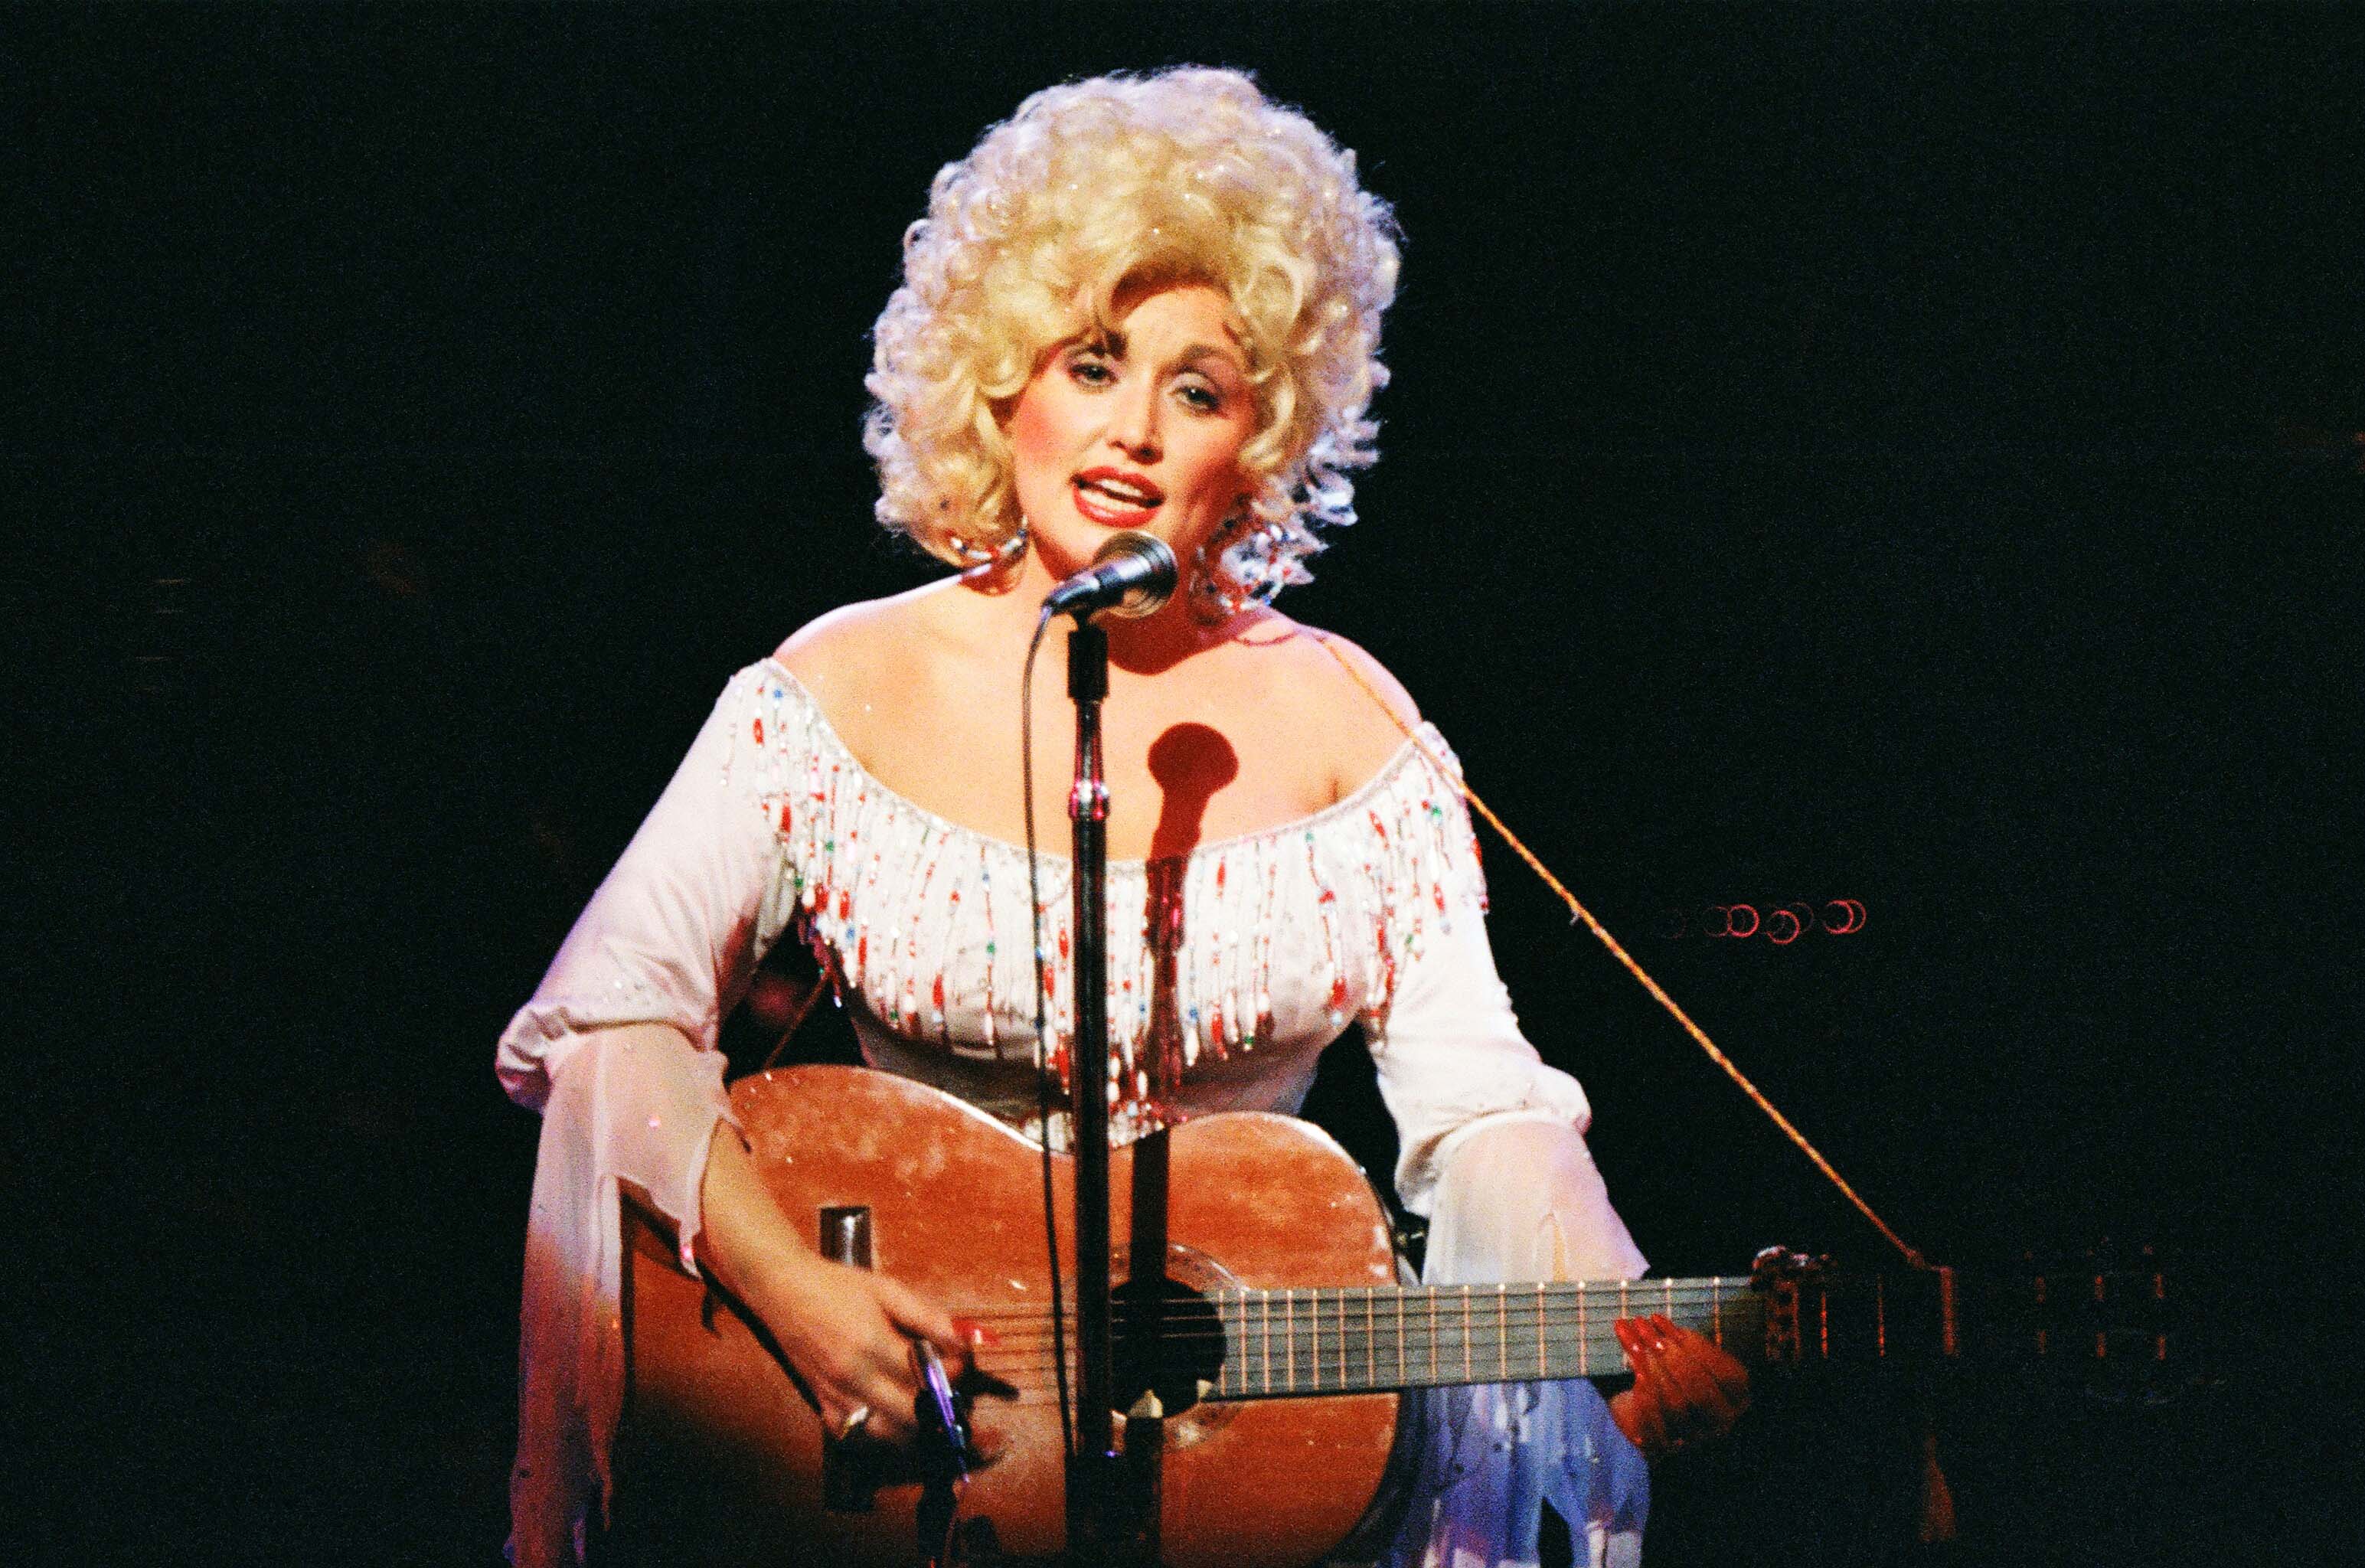 Dolly Parton sings with her guitar.